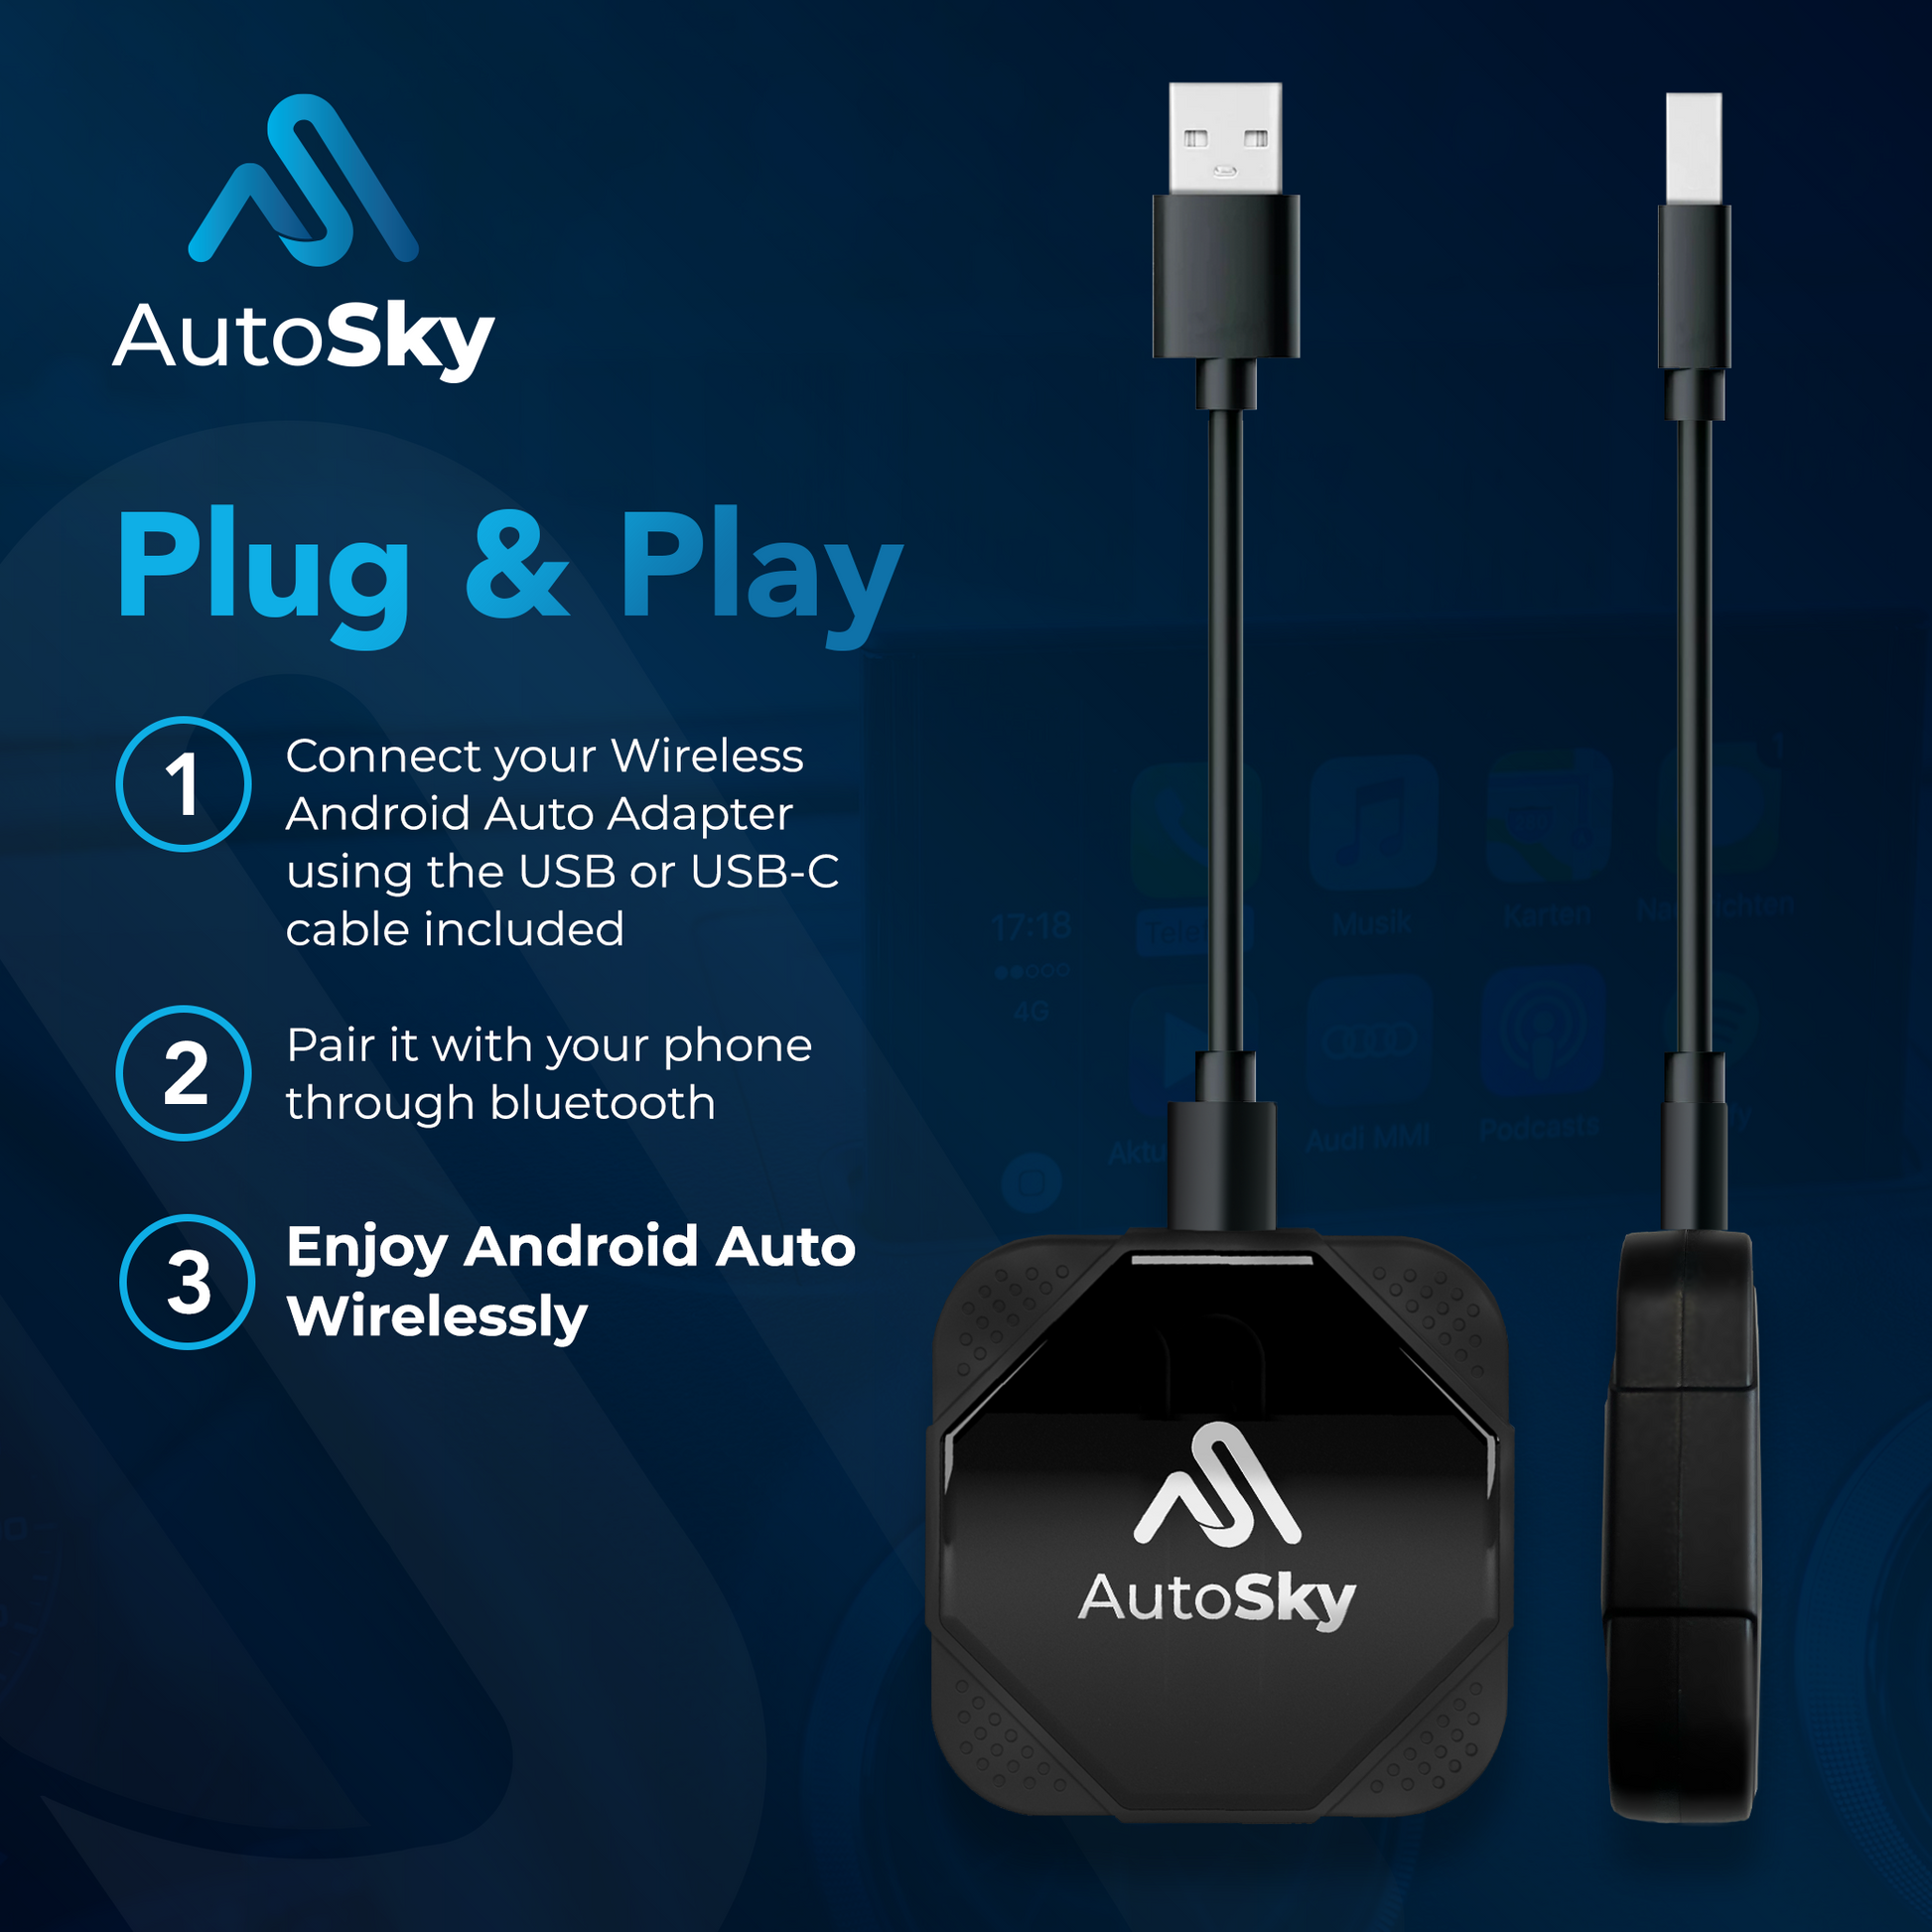 AutoSky Wireless Android Auto Car Adapter for Factory Wired Android Auto- Easy Set Up Plug & Play with USB & USB-C - WiFi 5GHz Instant Connection